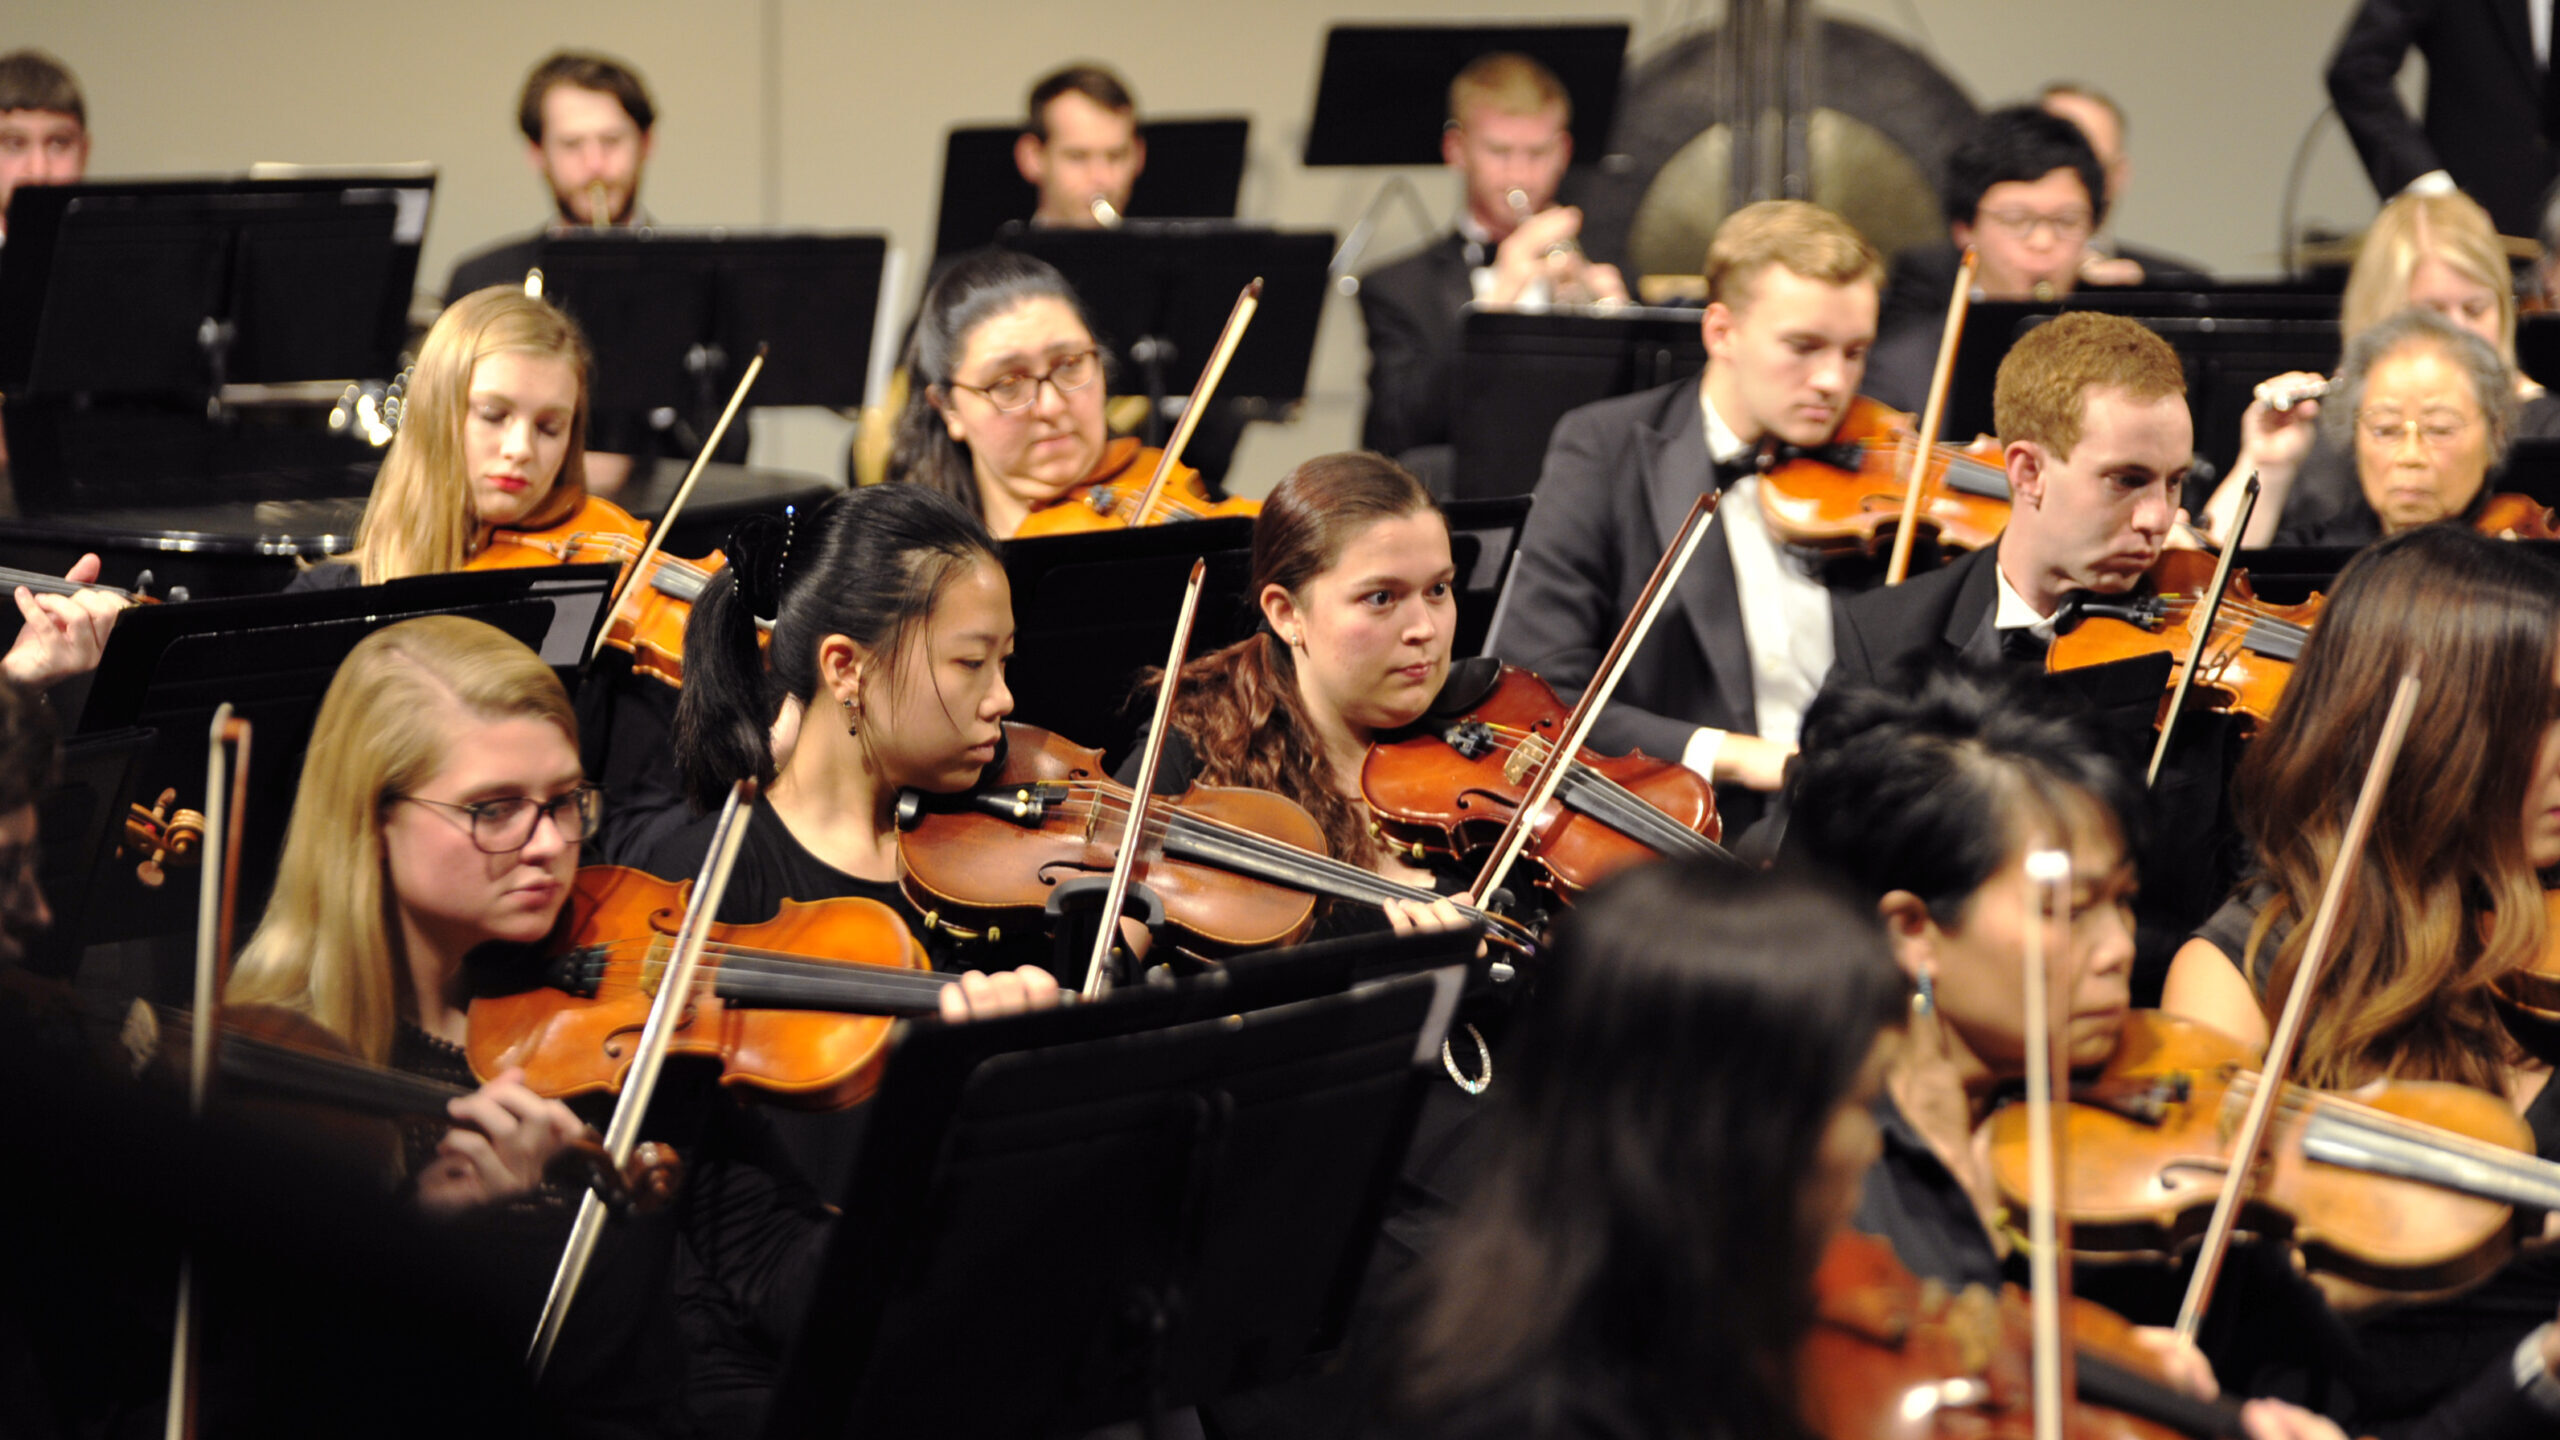 A group of musicians play violins during a symphony concert